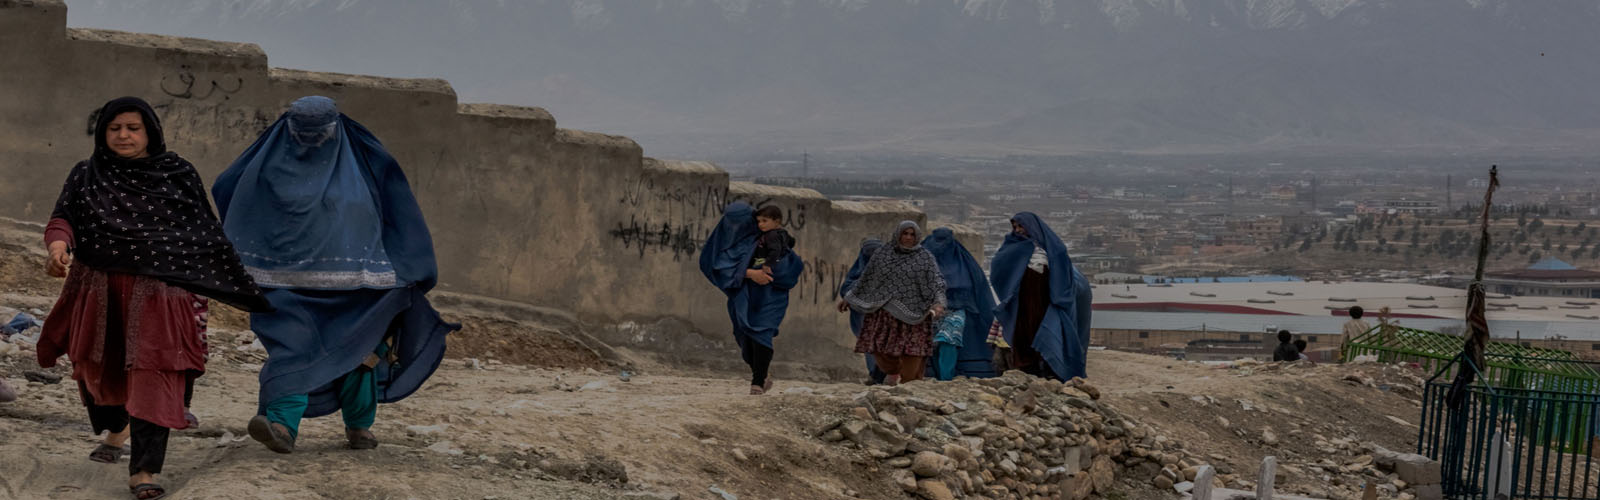 Afghanistan´s ´hill of widows´